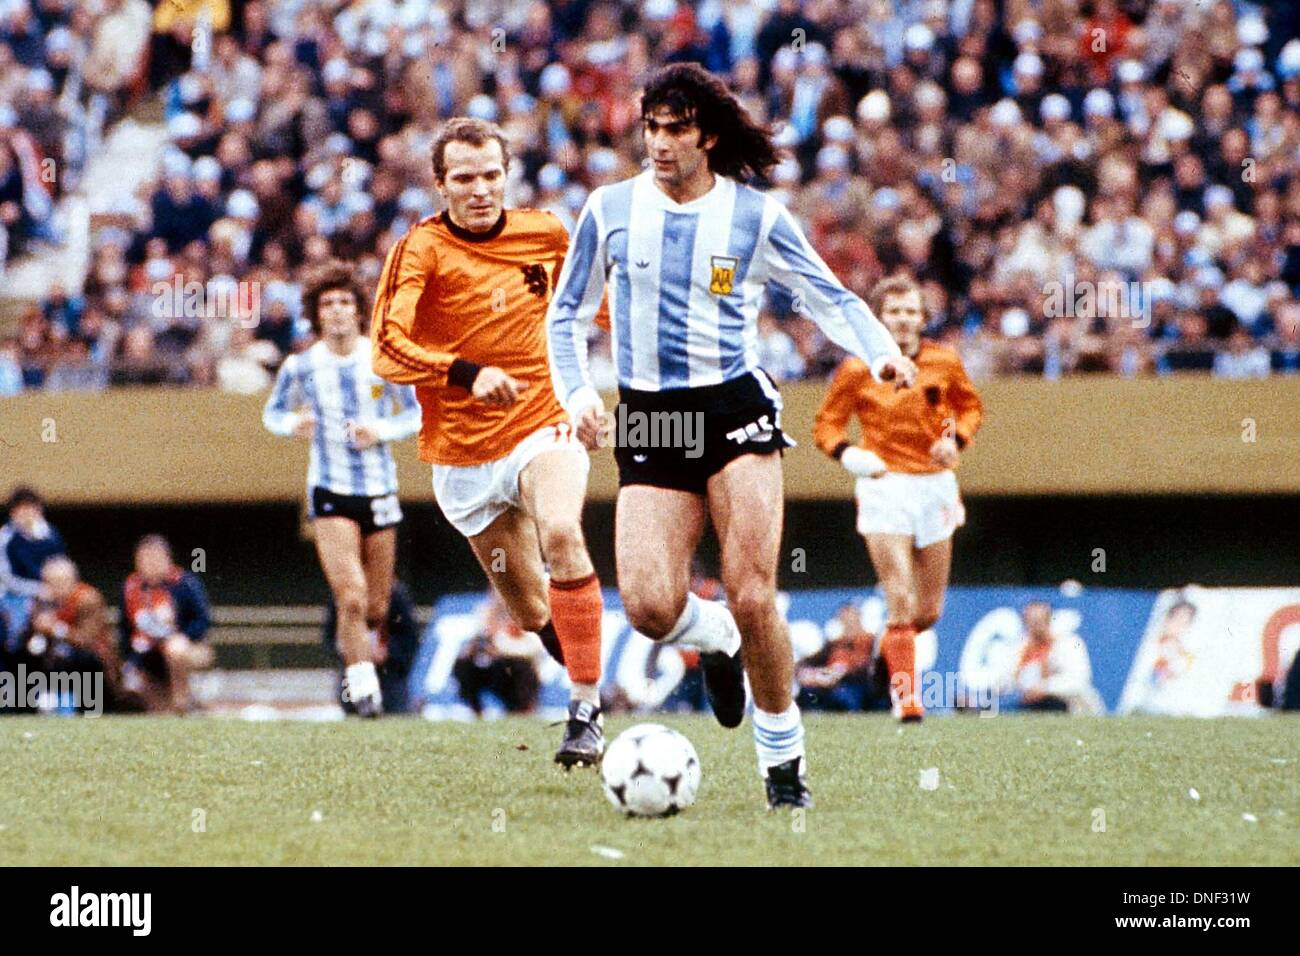 25061978-buenos-aires-argentina-mario-kempes-argentinachallenged-by-DNF31W.jpg